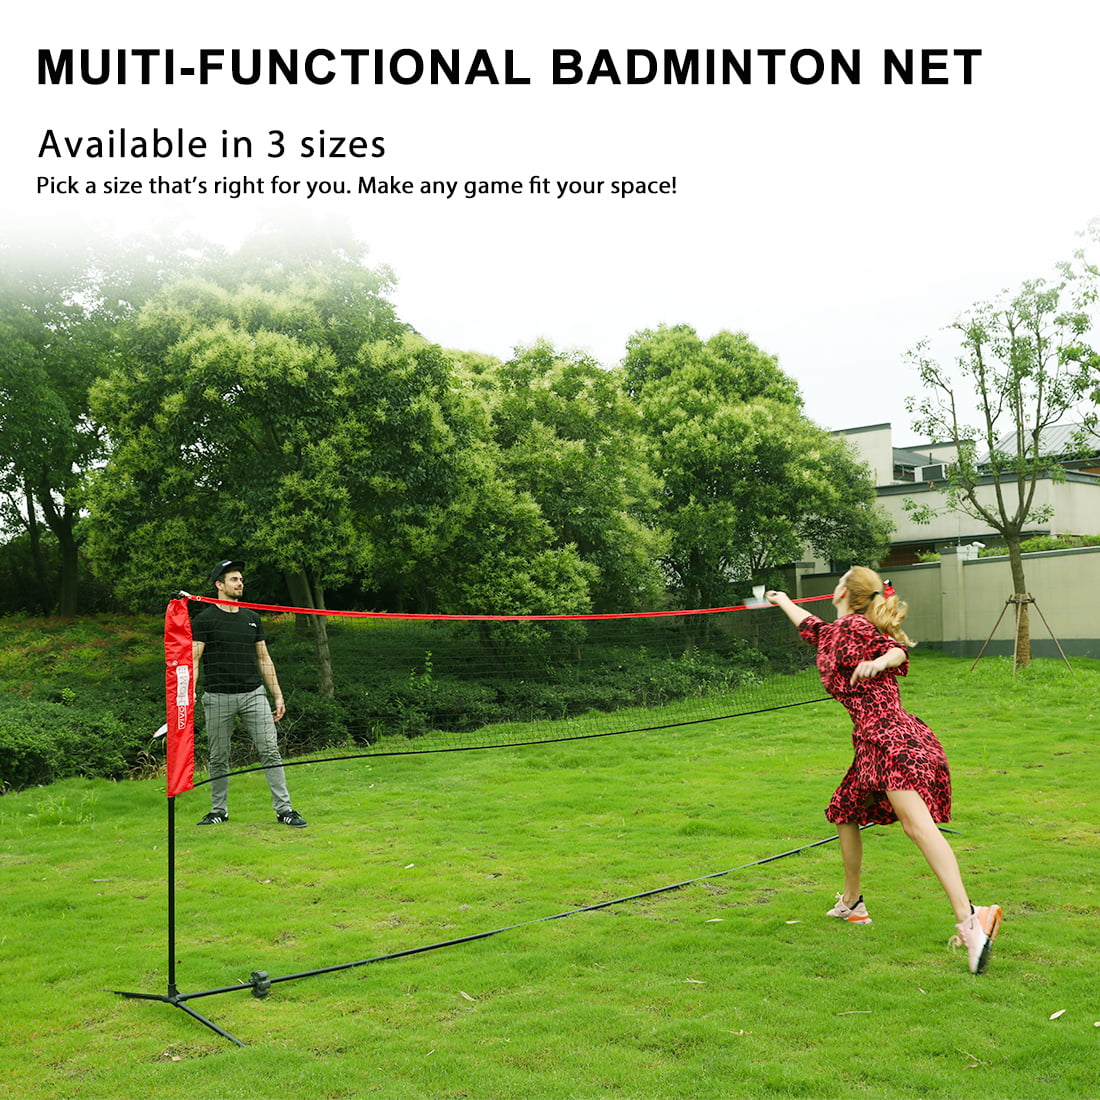 Easy Setup for Indoor Outdoor Court KL KLB Sport Badminton Net Set Beach Soccer Tennis Kids Volleyball Pickleball Driveway Portable Height Adjustable Sports Set with Poles for Tennis 